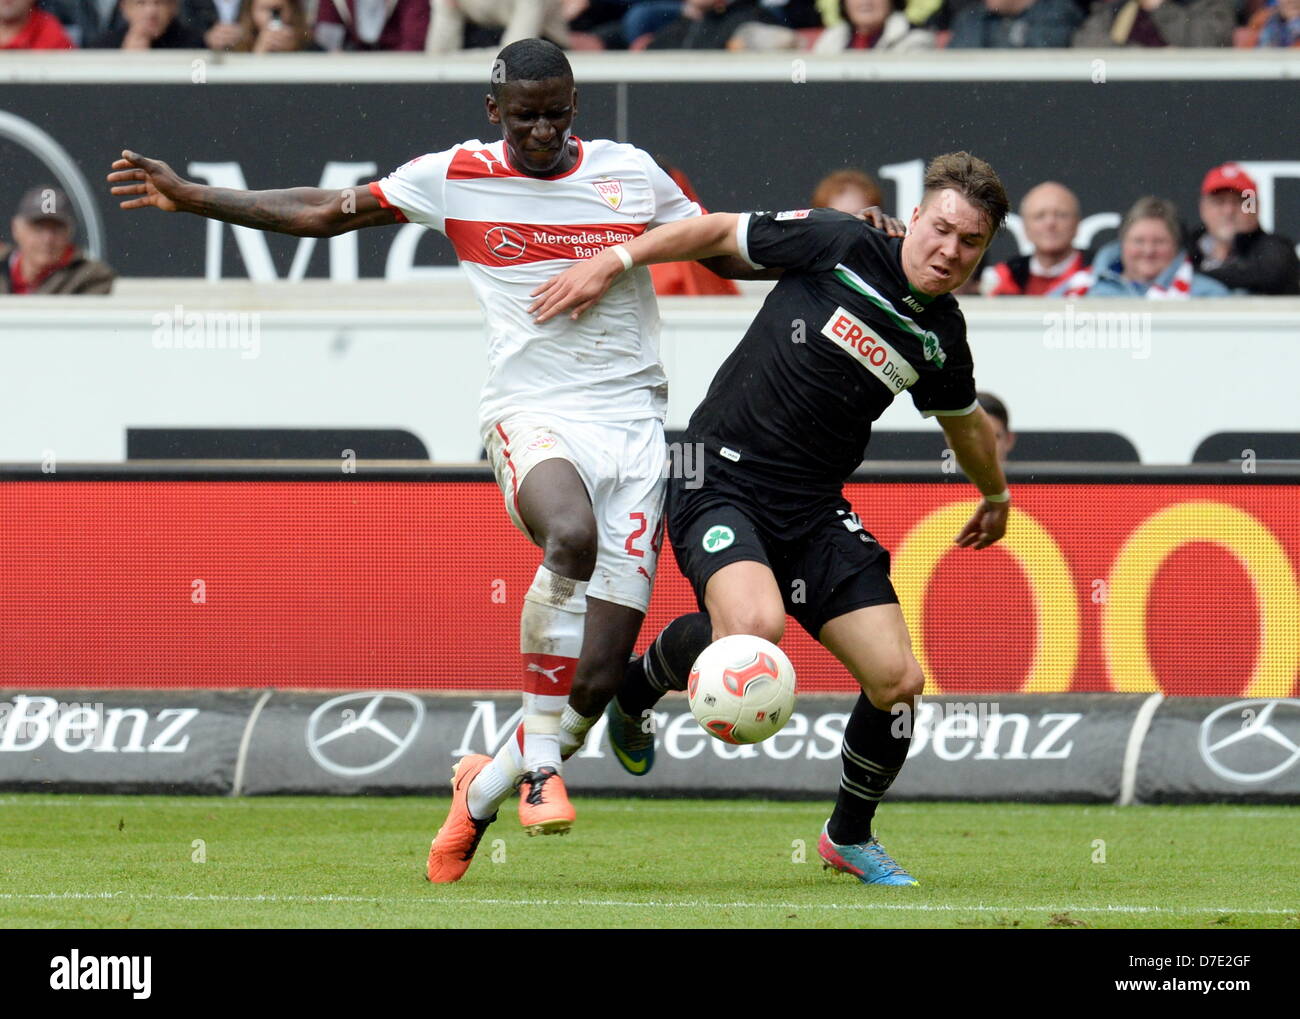 Stuttgart's Antonio Ruediger (L) and Fuerth's Felix Klaus vie for the ball during the Bundesliga soccer match between VfB Stuttgart and SpVgg Greuther Fuerth at Mercedes-Benz Arena in Stuttgart, Germany, 04 May 2013. Photo: Bernd Weissbrod Stock Photo